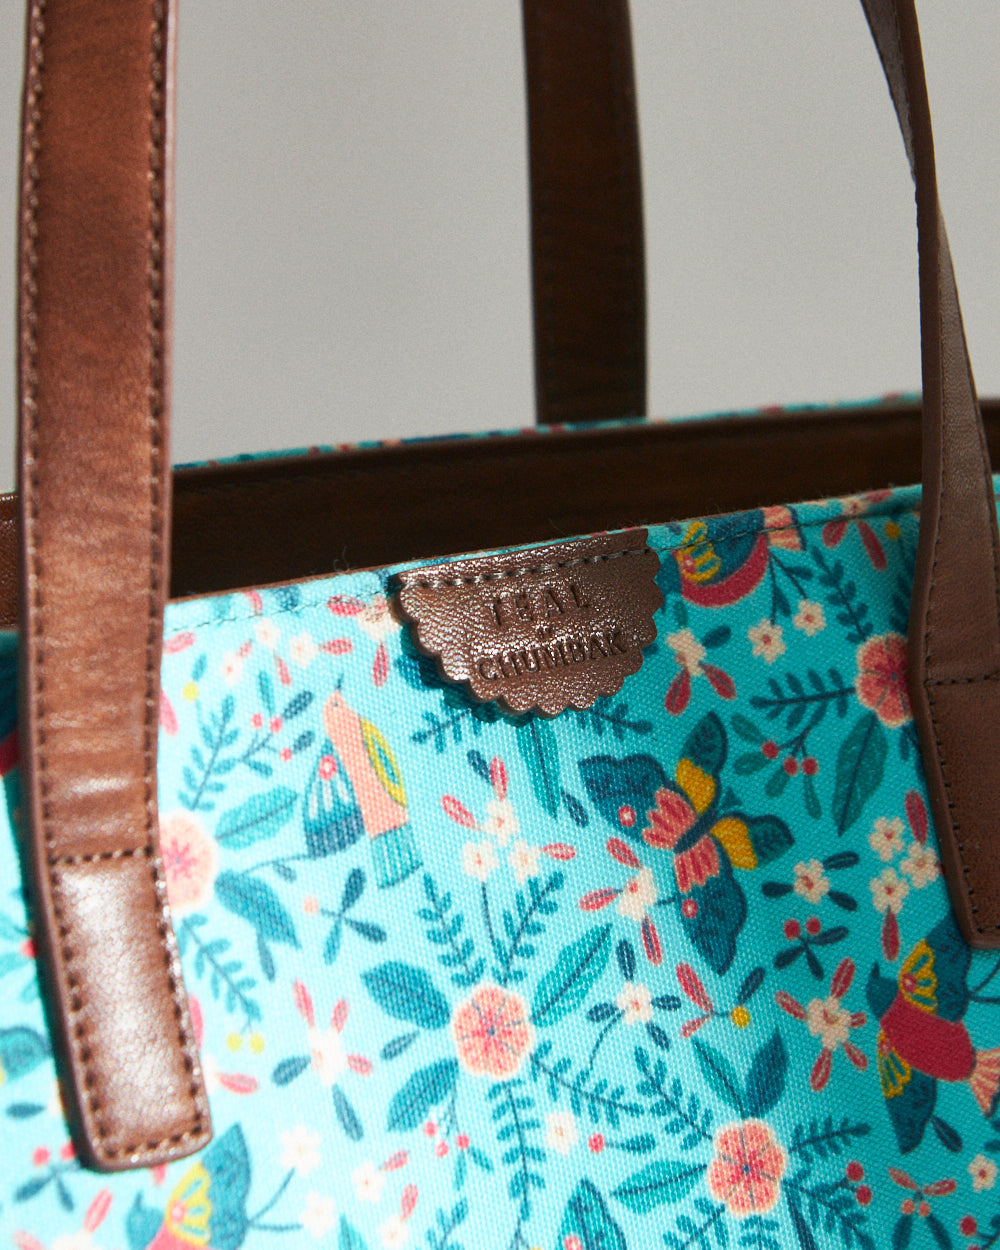 Teal By Chumbak Birds of Paradise Tote